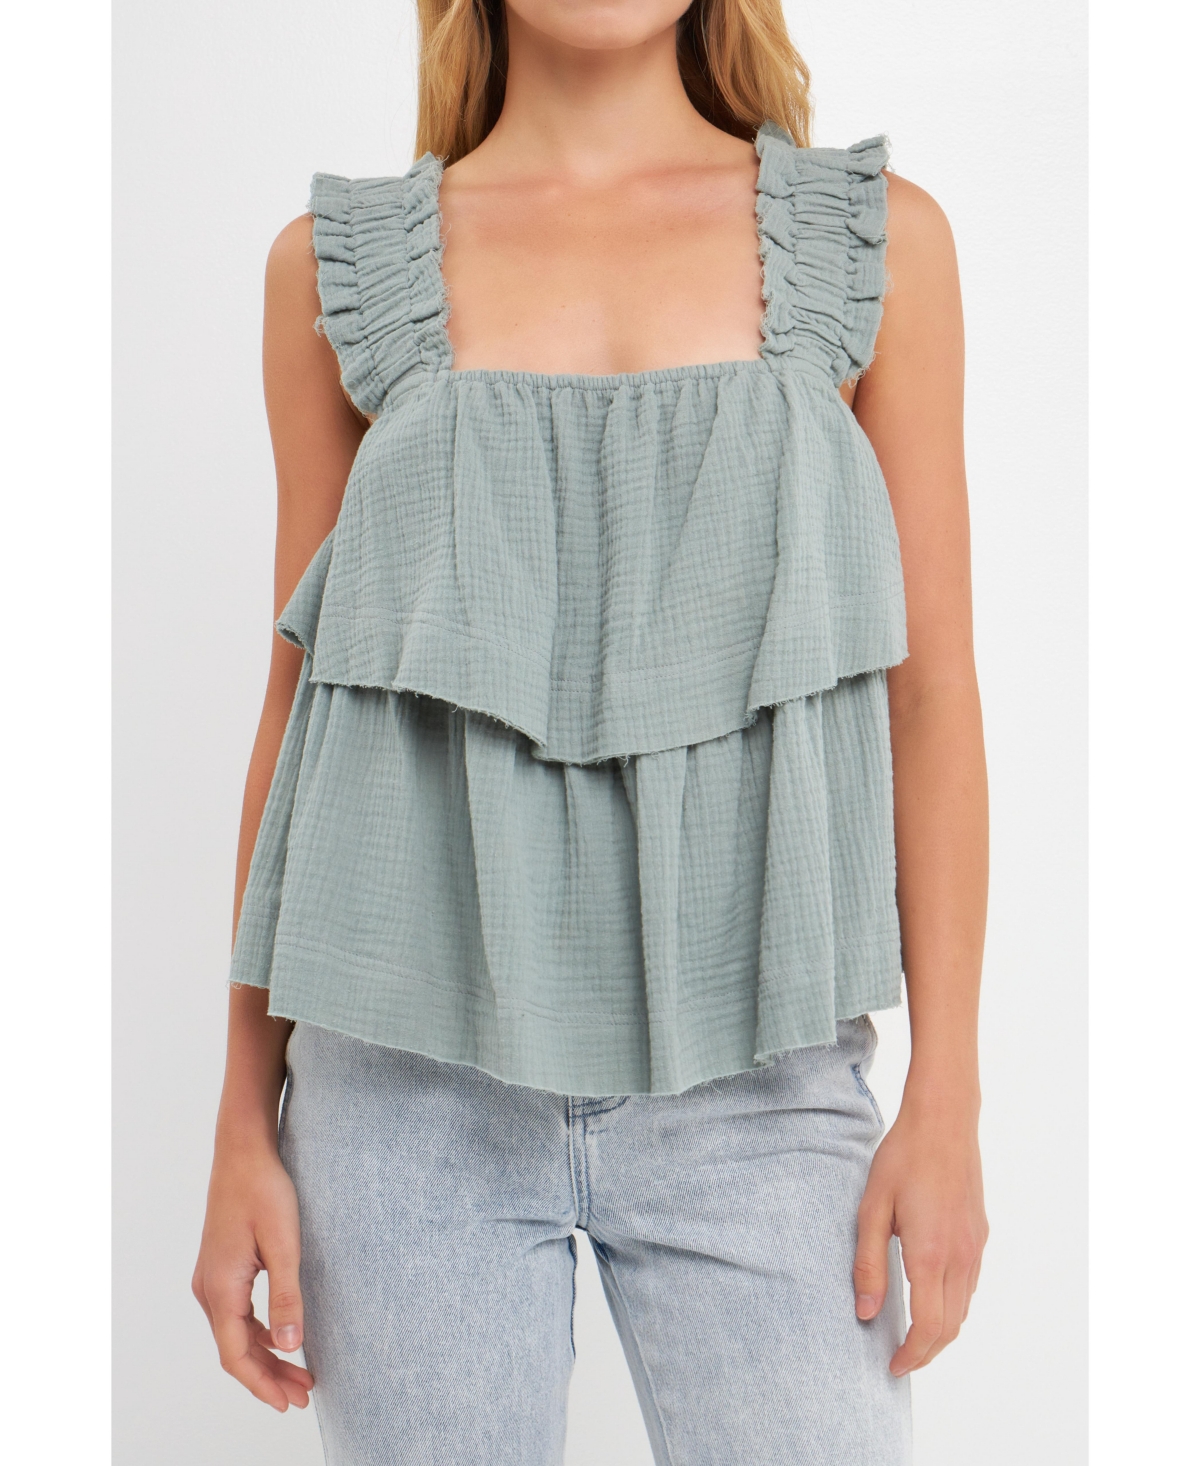 Women's Ruffled Straps with Tiered Top - Dusty green